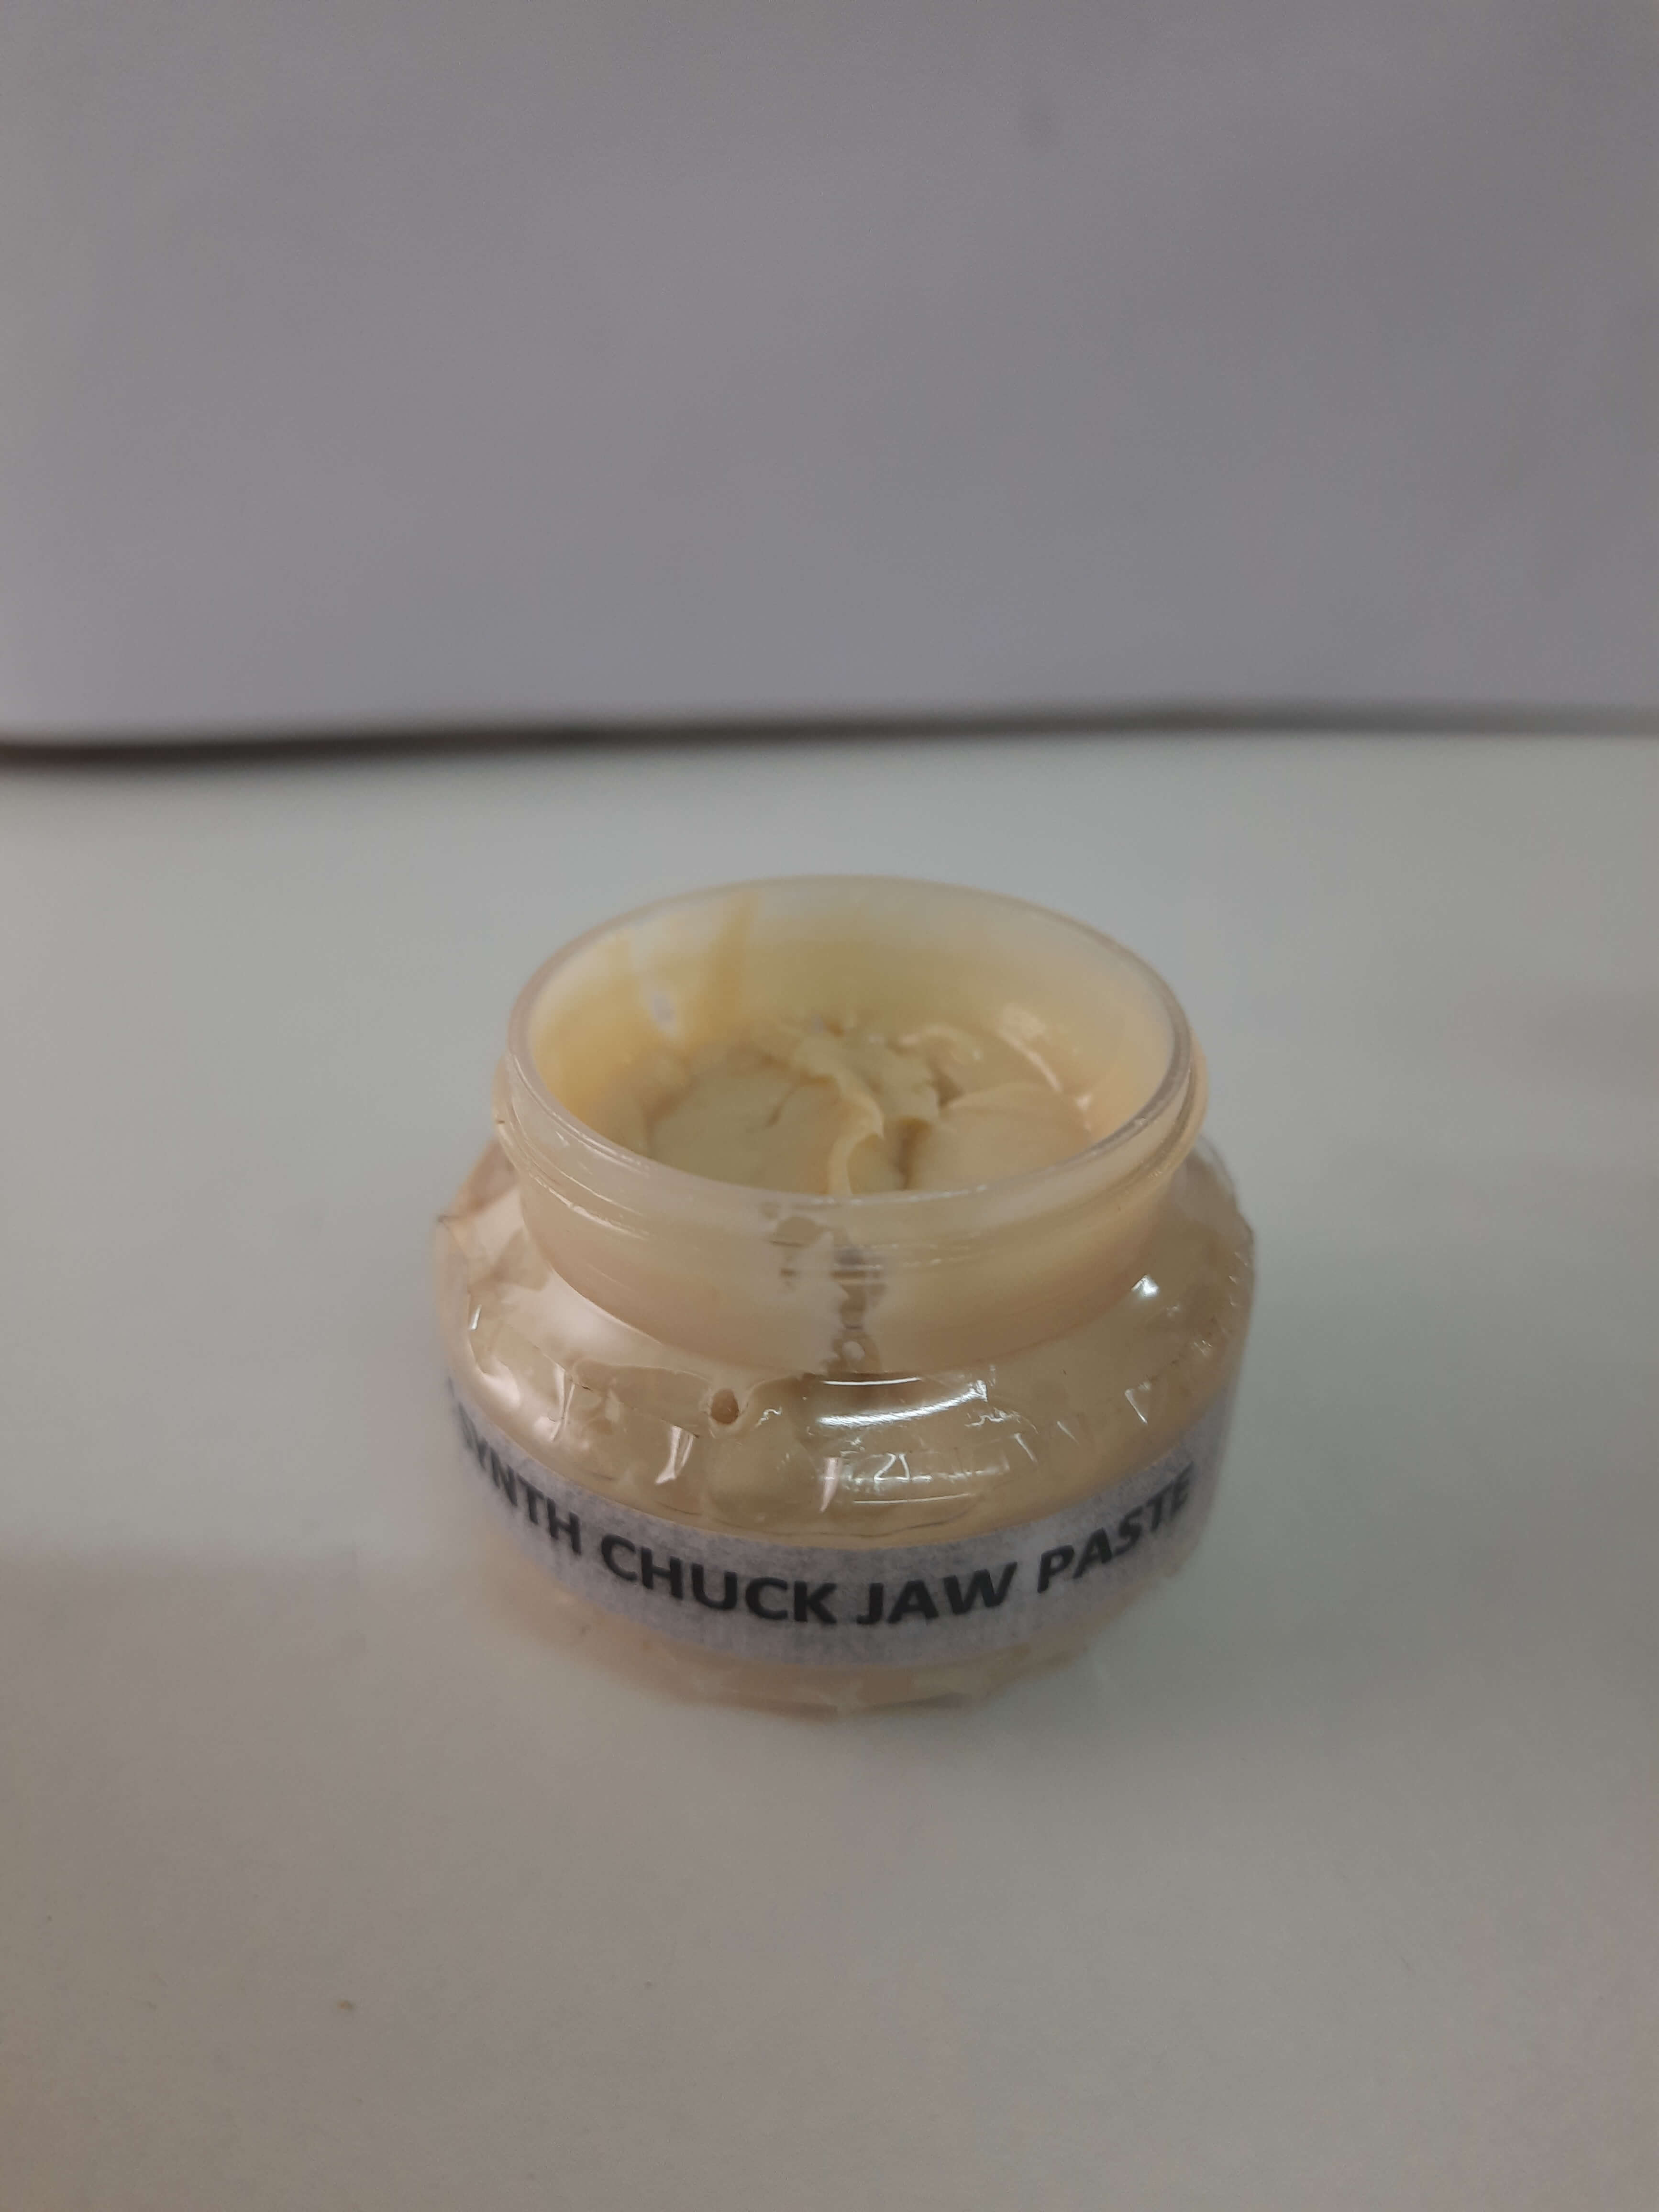 Synth Chuck Jaw Paste Grease